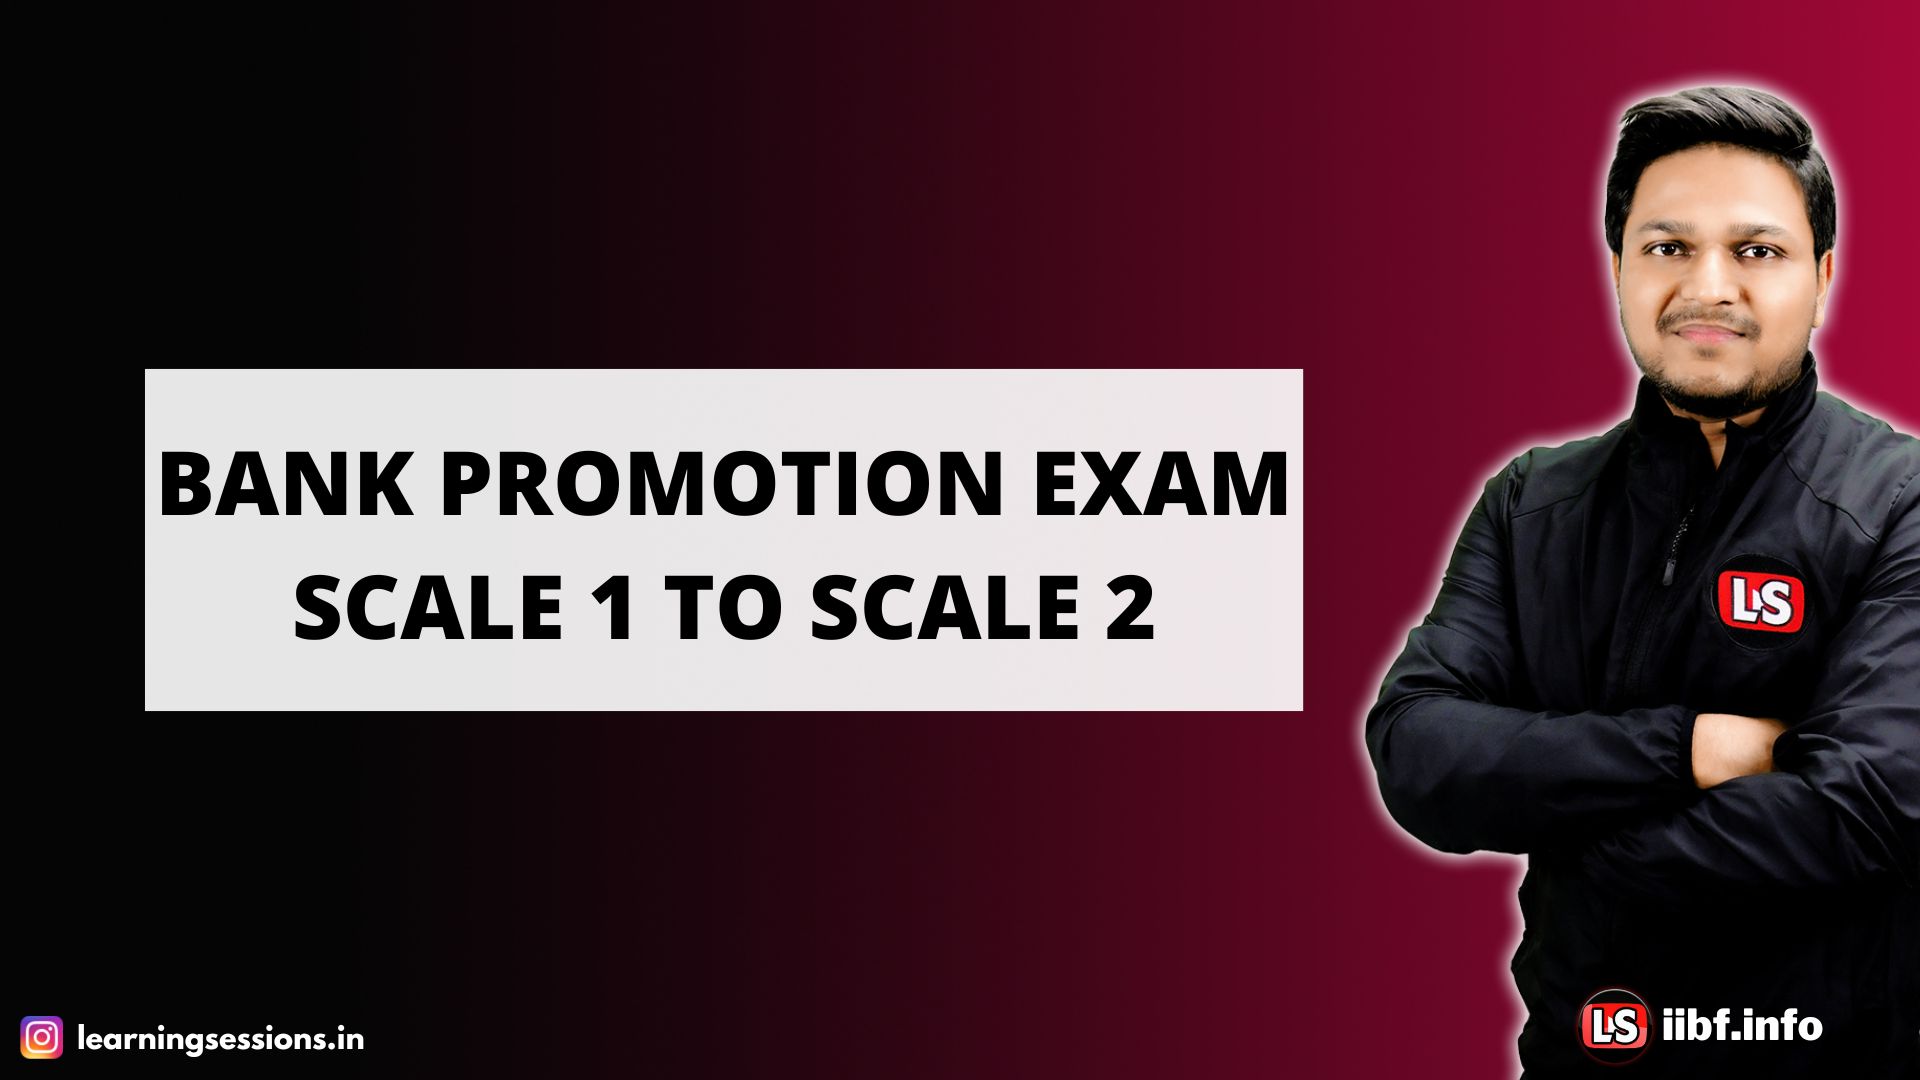 BANK PROMOTION EXAM SCALE 1 TO SCALE 2